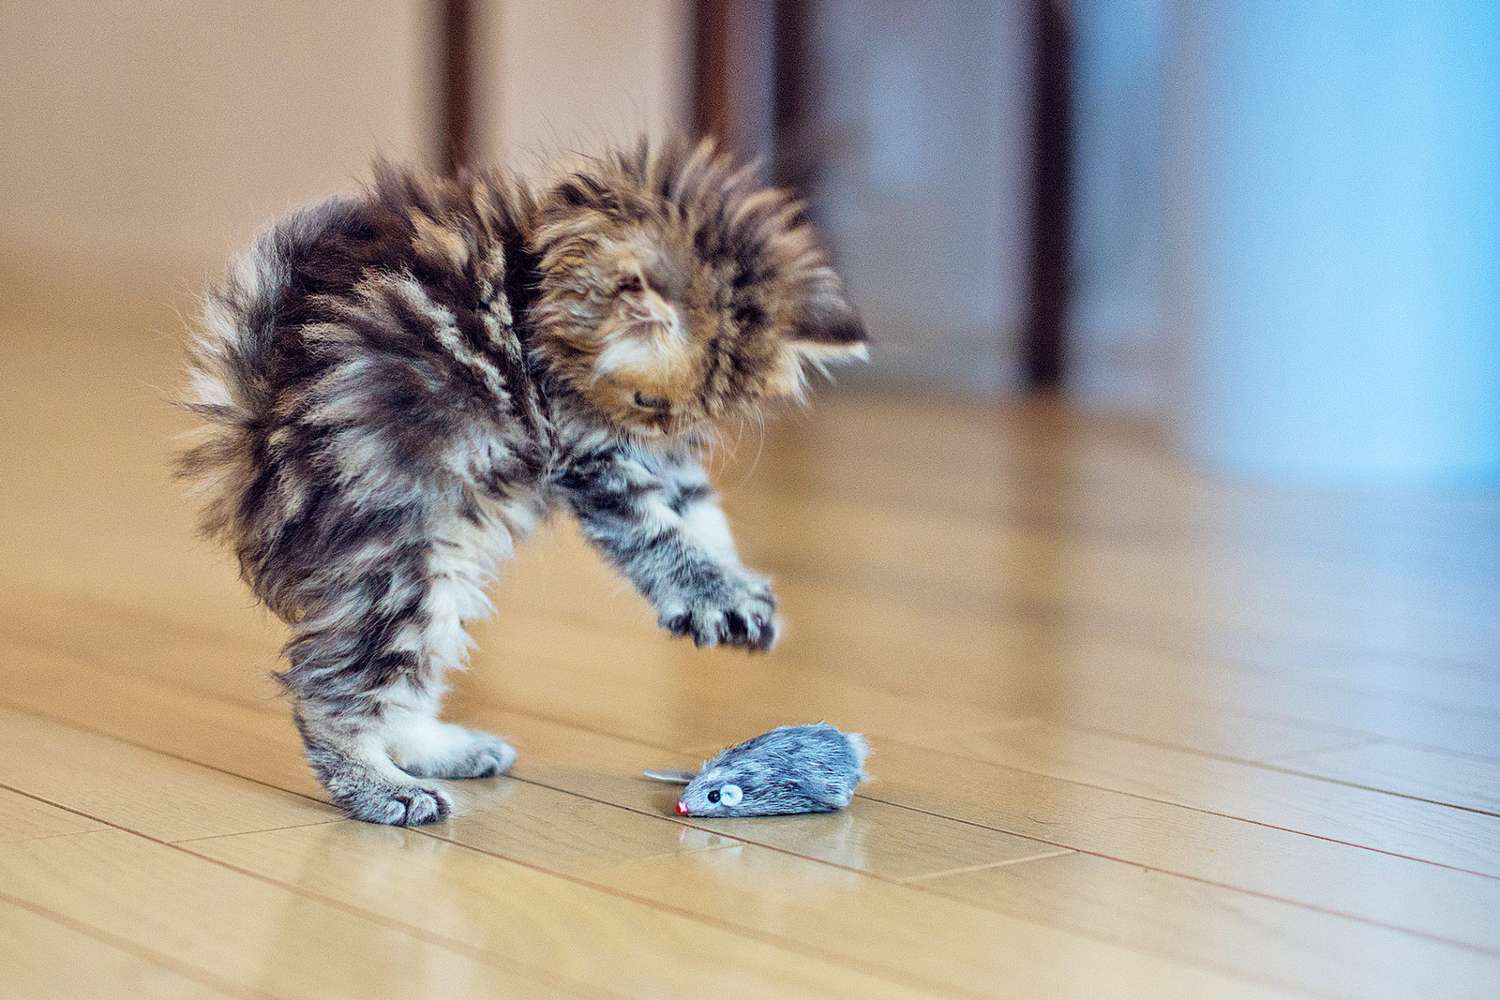 14 Cute Kitten Pictures to Brighten Your Day | Daily Paws